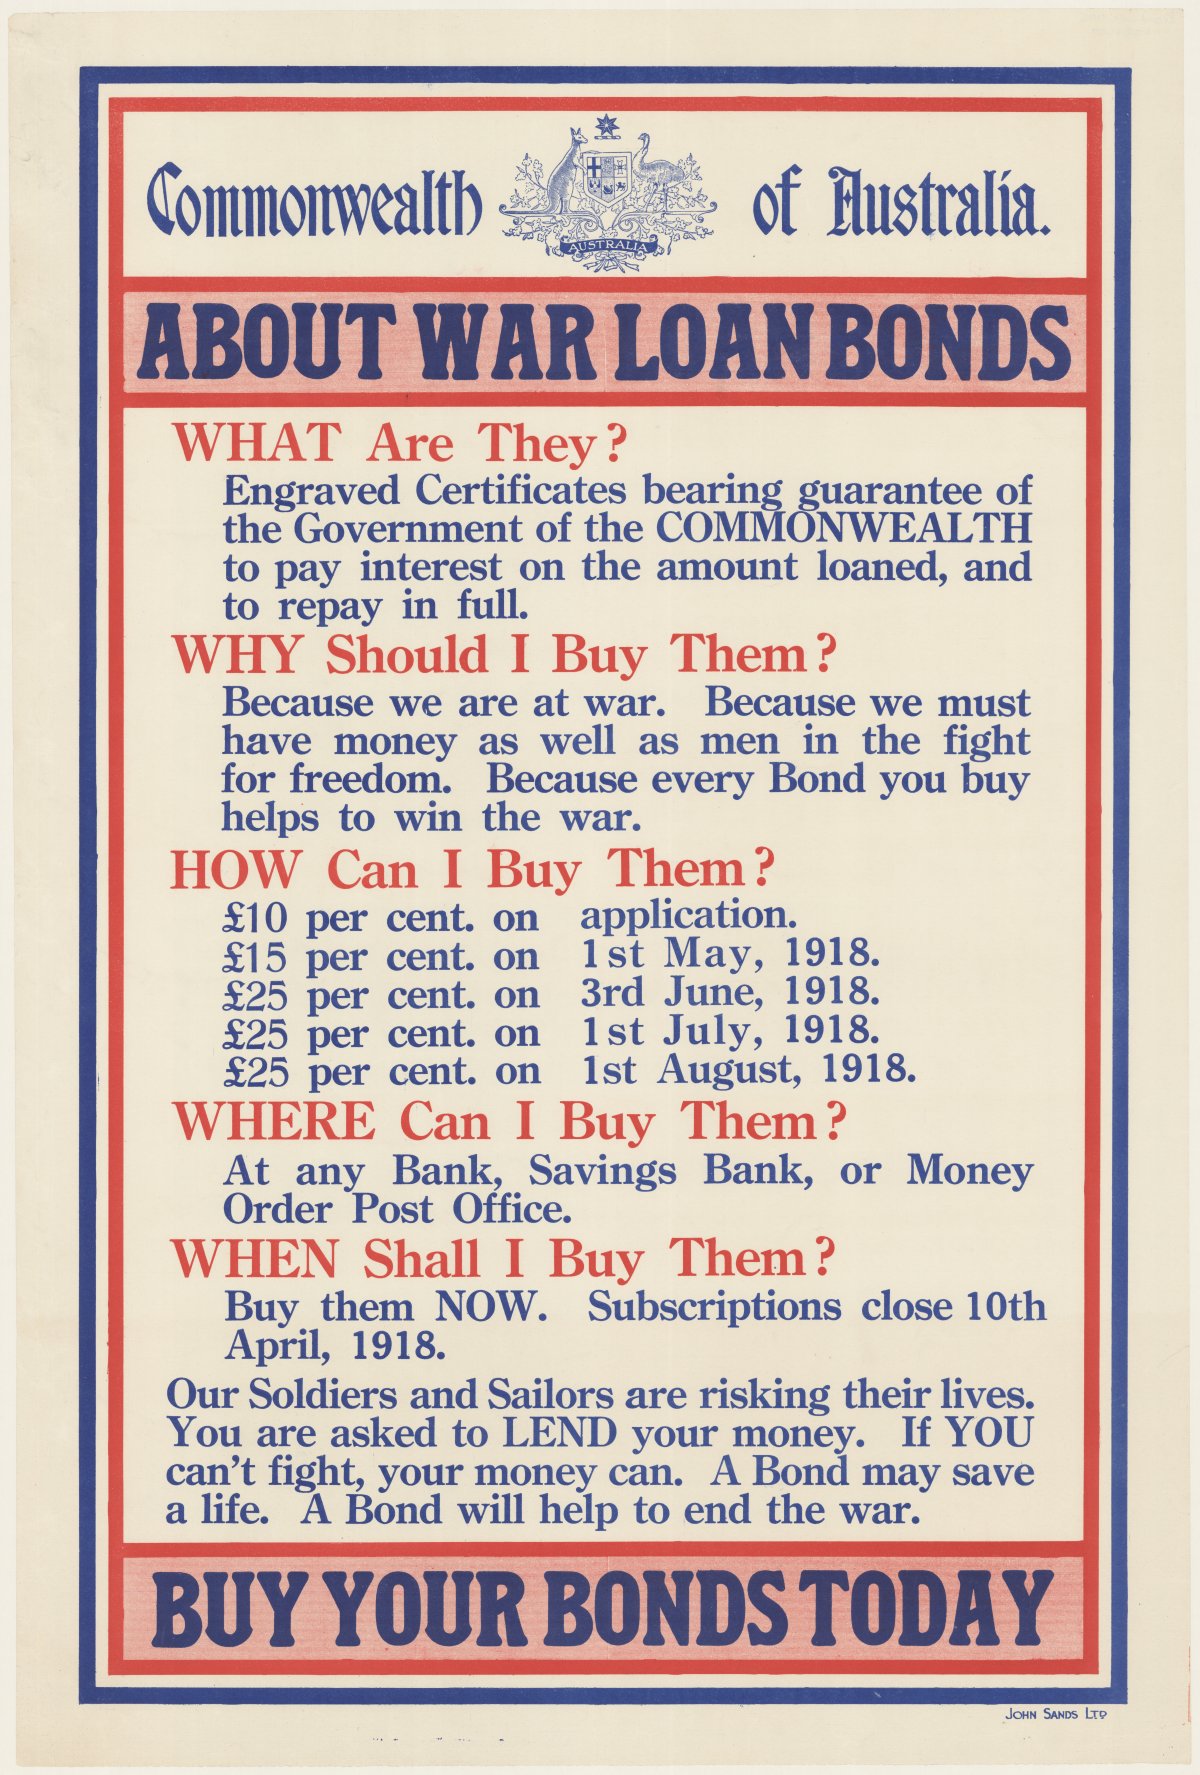 A red, white and blue poster. At the top of the poster is the Australian coat of arms with the words "Commonwealth of Australia" and a large headline saying "ABOUT WAR LOAN BONDS". At the bottom of the poster is another large headline that says "BUY YOUR BONDS TODAY"